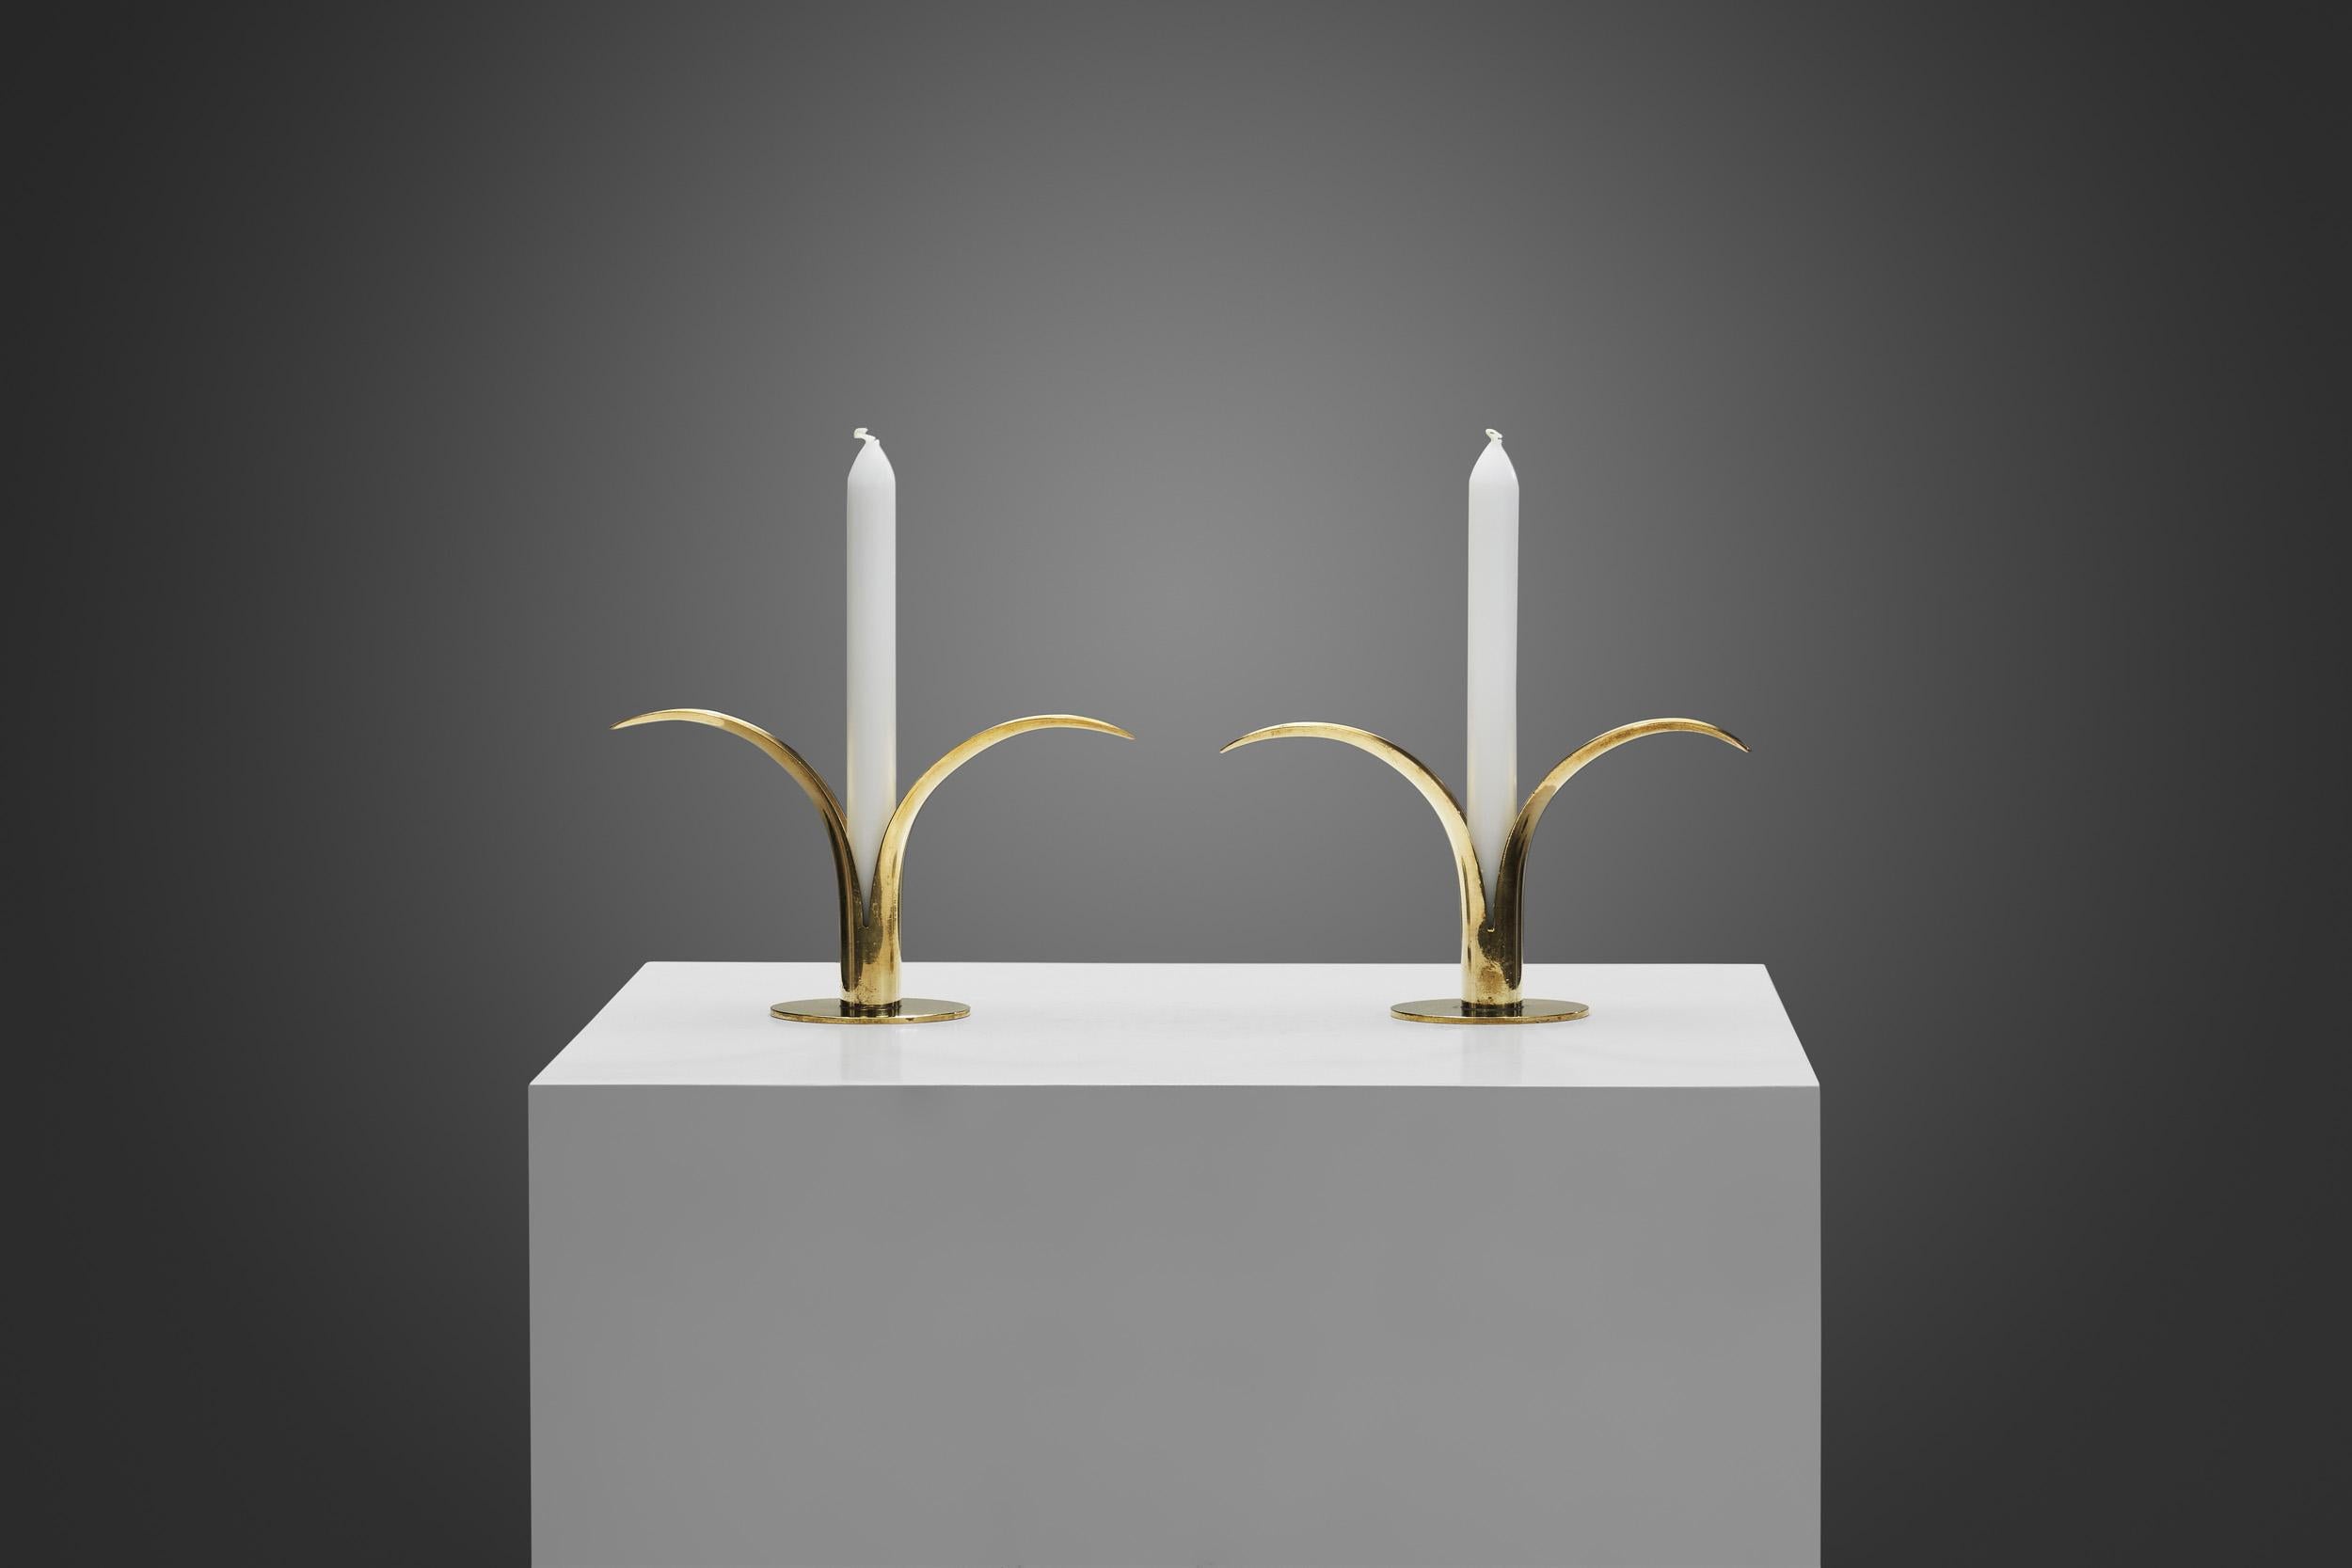 The Lily candlestick (“Liljan” in Swedish) was designed by the Swedish sculptor Ivar Ålenius-Björk for the world fair in New York in 1939. These candlesticks are common on dining tables and side tables throughout Sweden, but the design is an